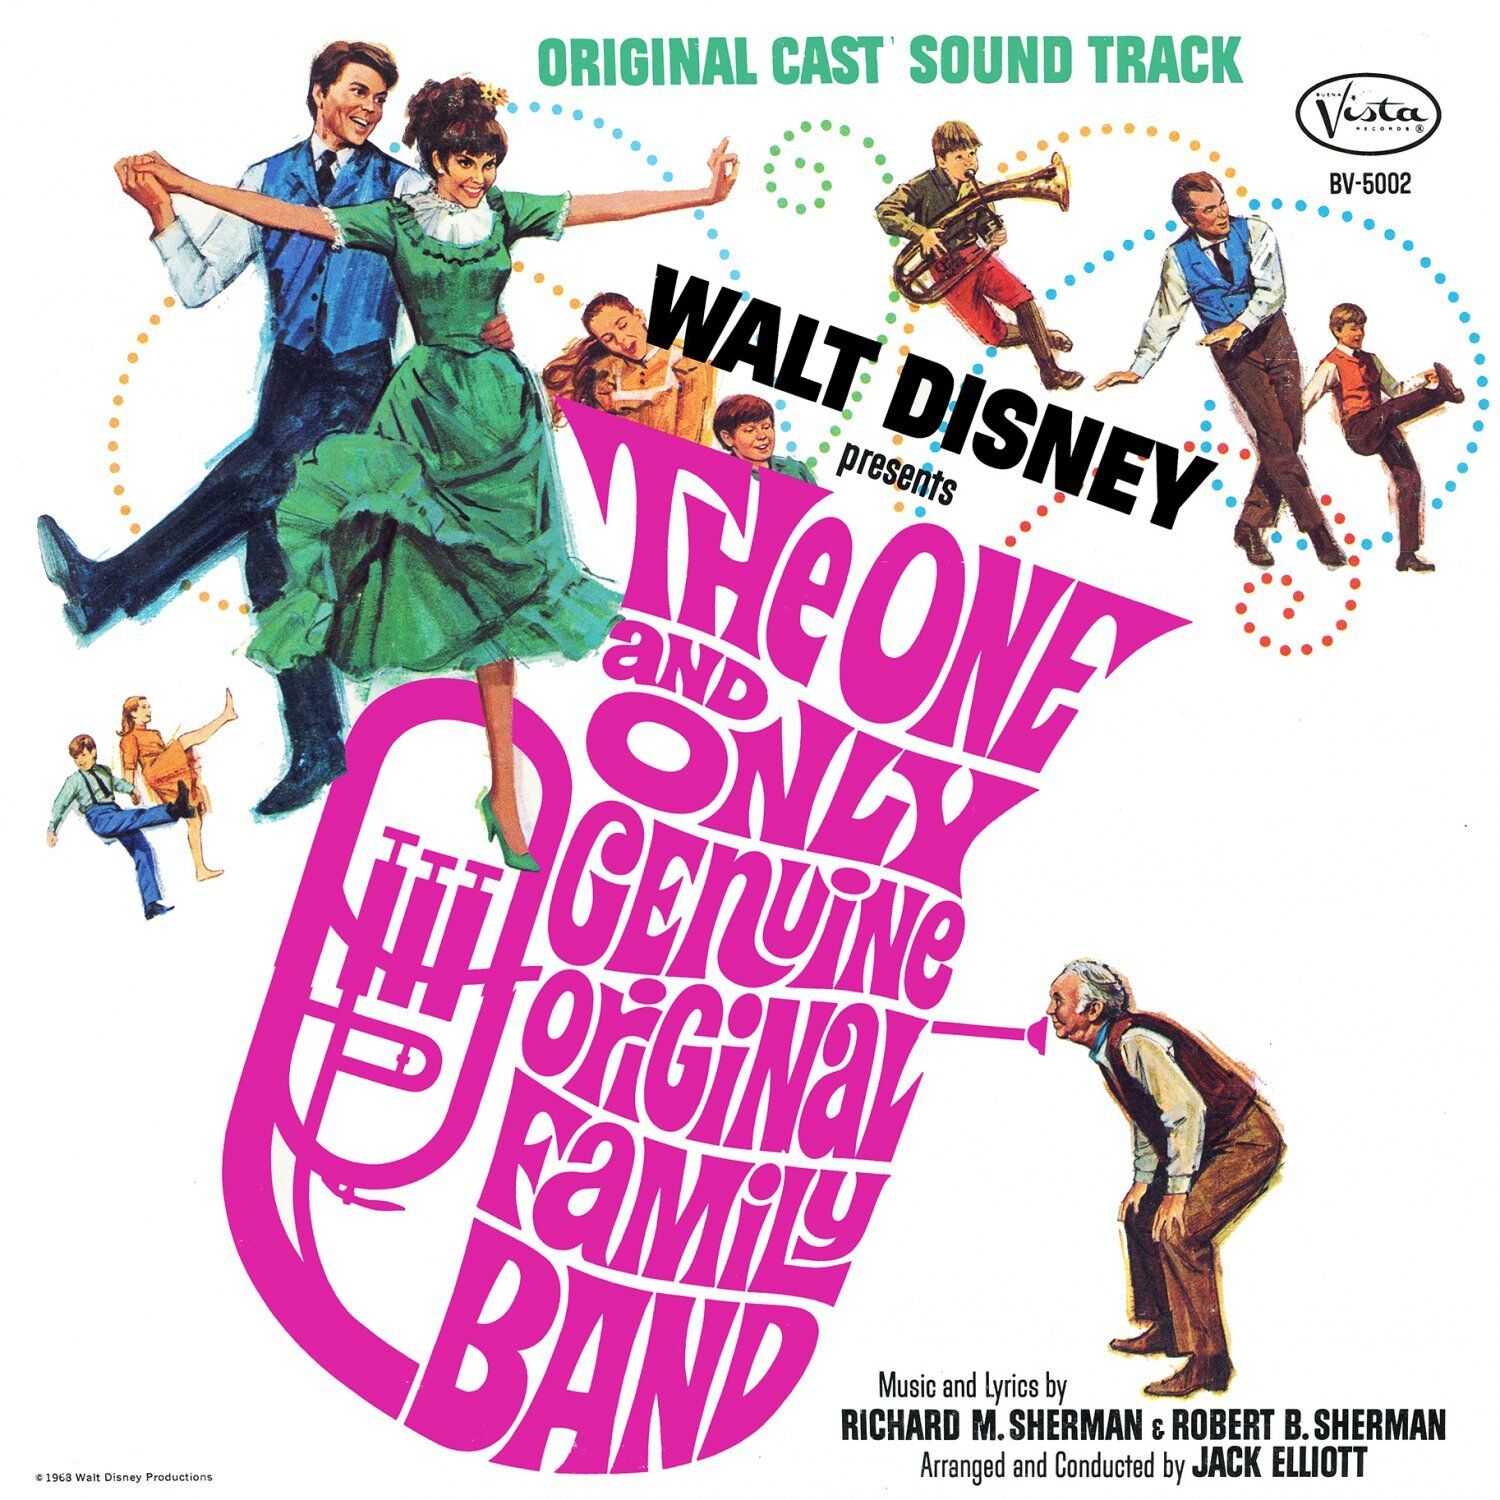 Disney: The One & Only Genuine Original Family Band - LP (5002)